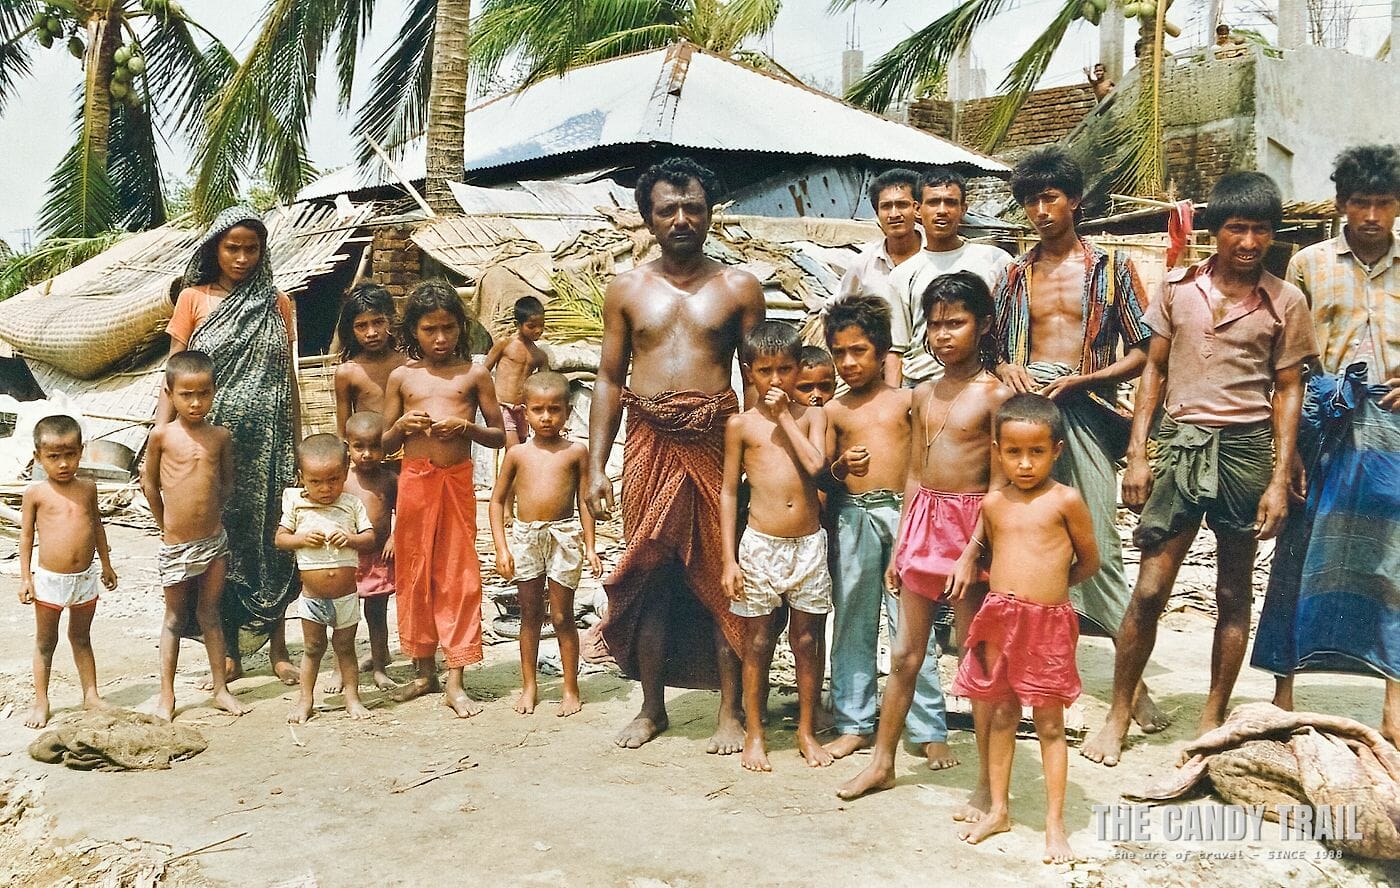 villagers gather the day after cyclone in Cox's Bazar in Bangladesh, 1991.